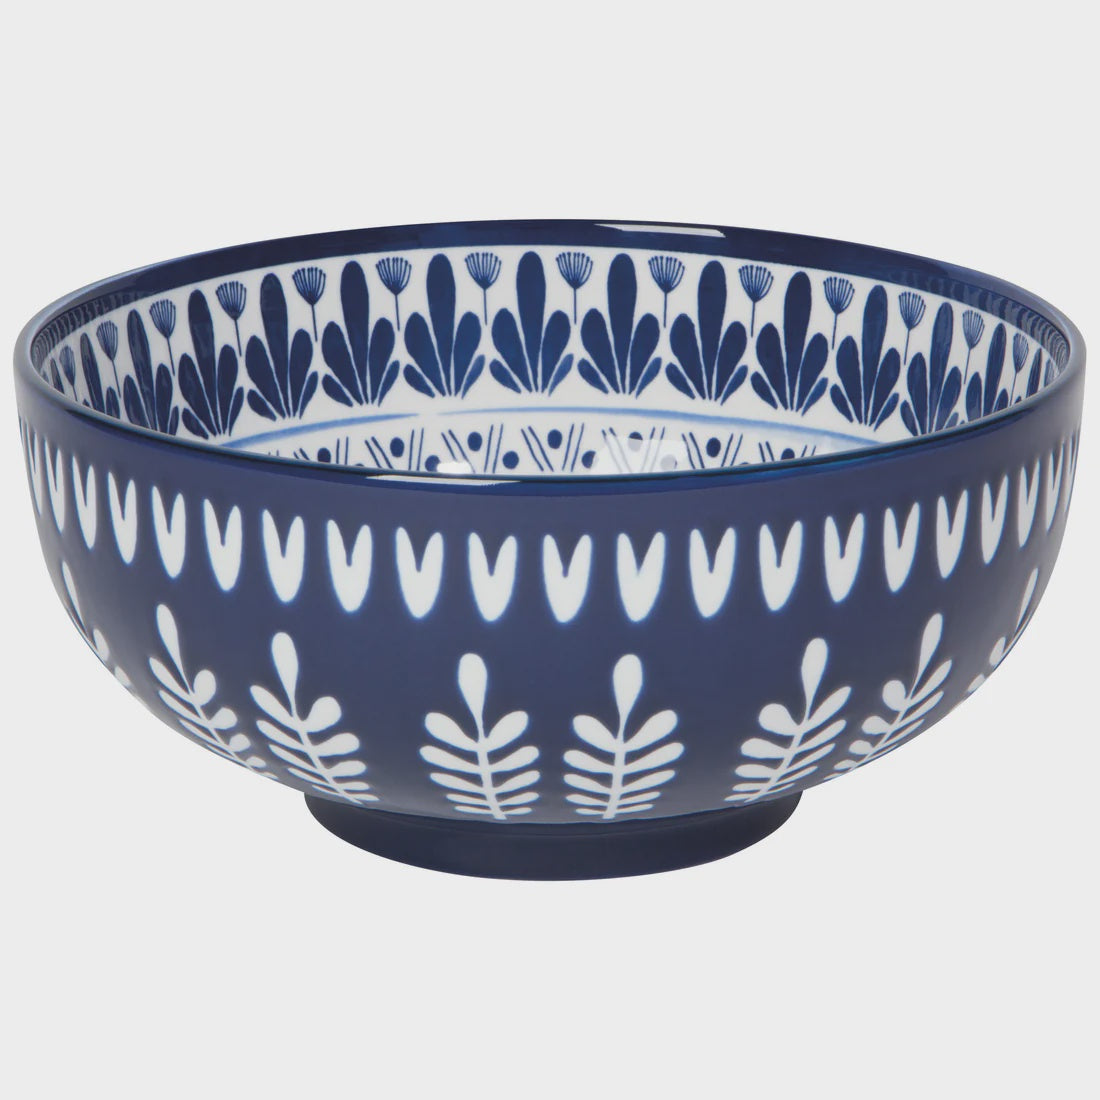 Porto Stamped Bowl Large, 8 inch